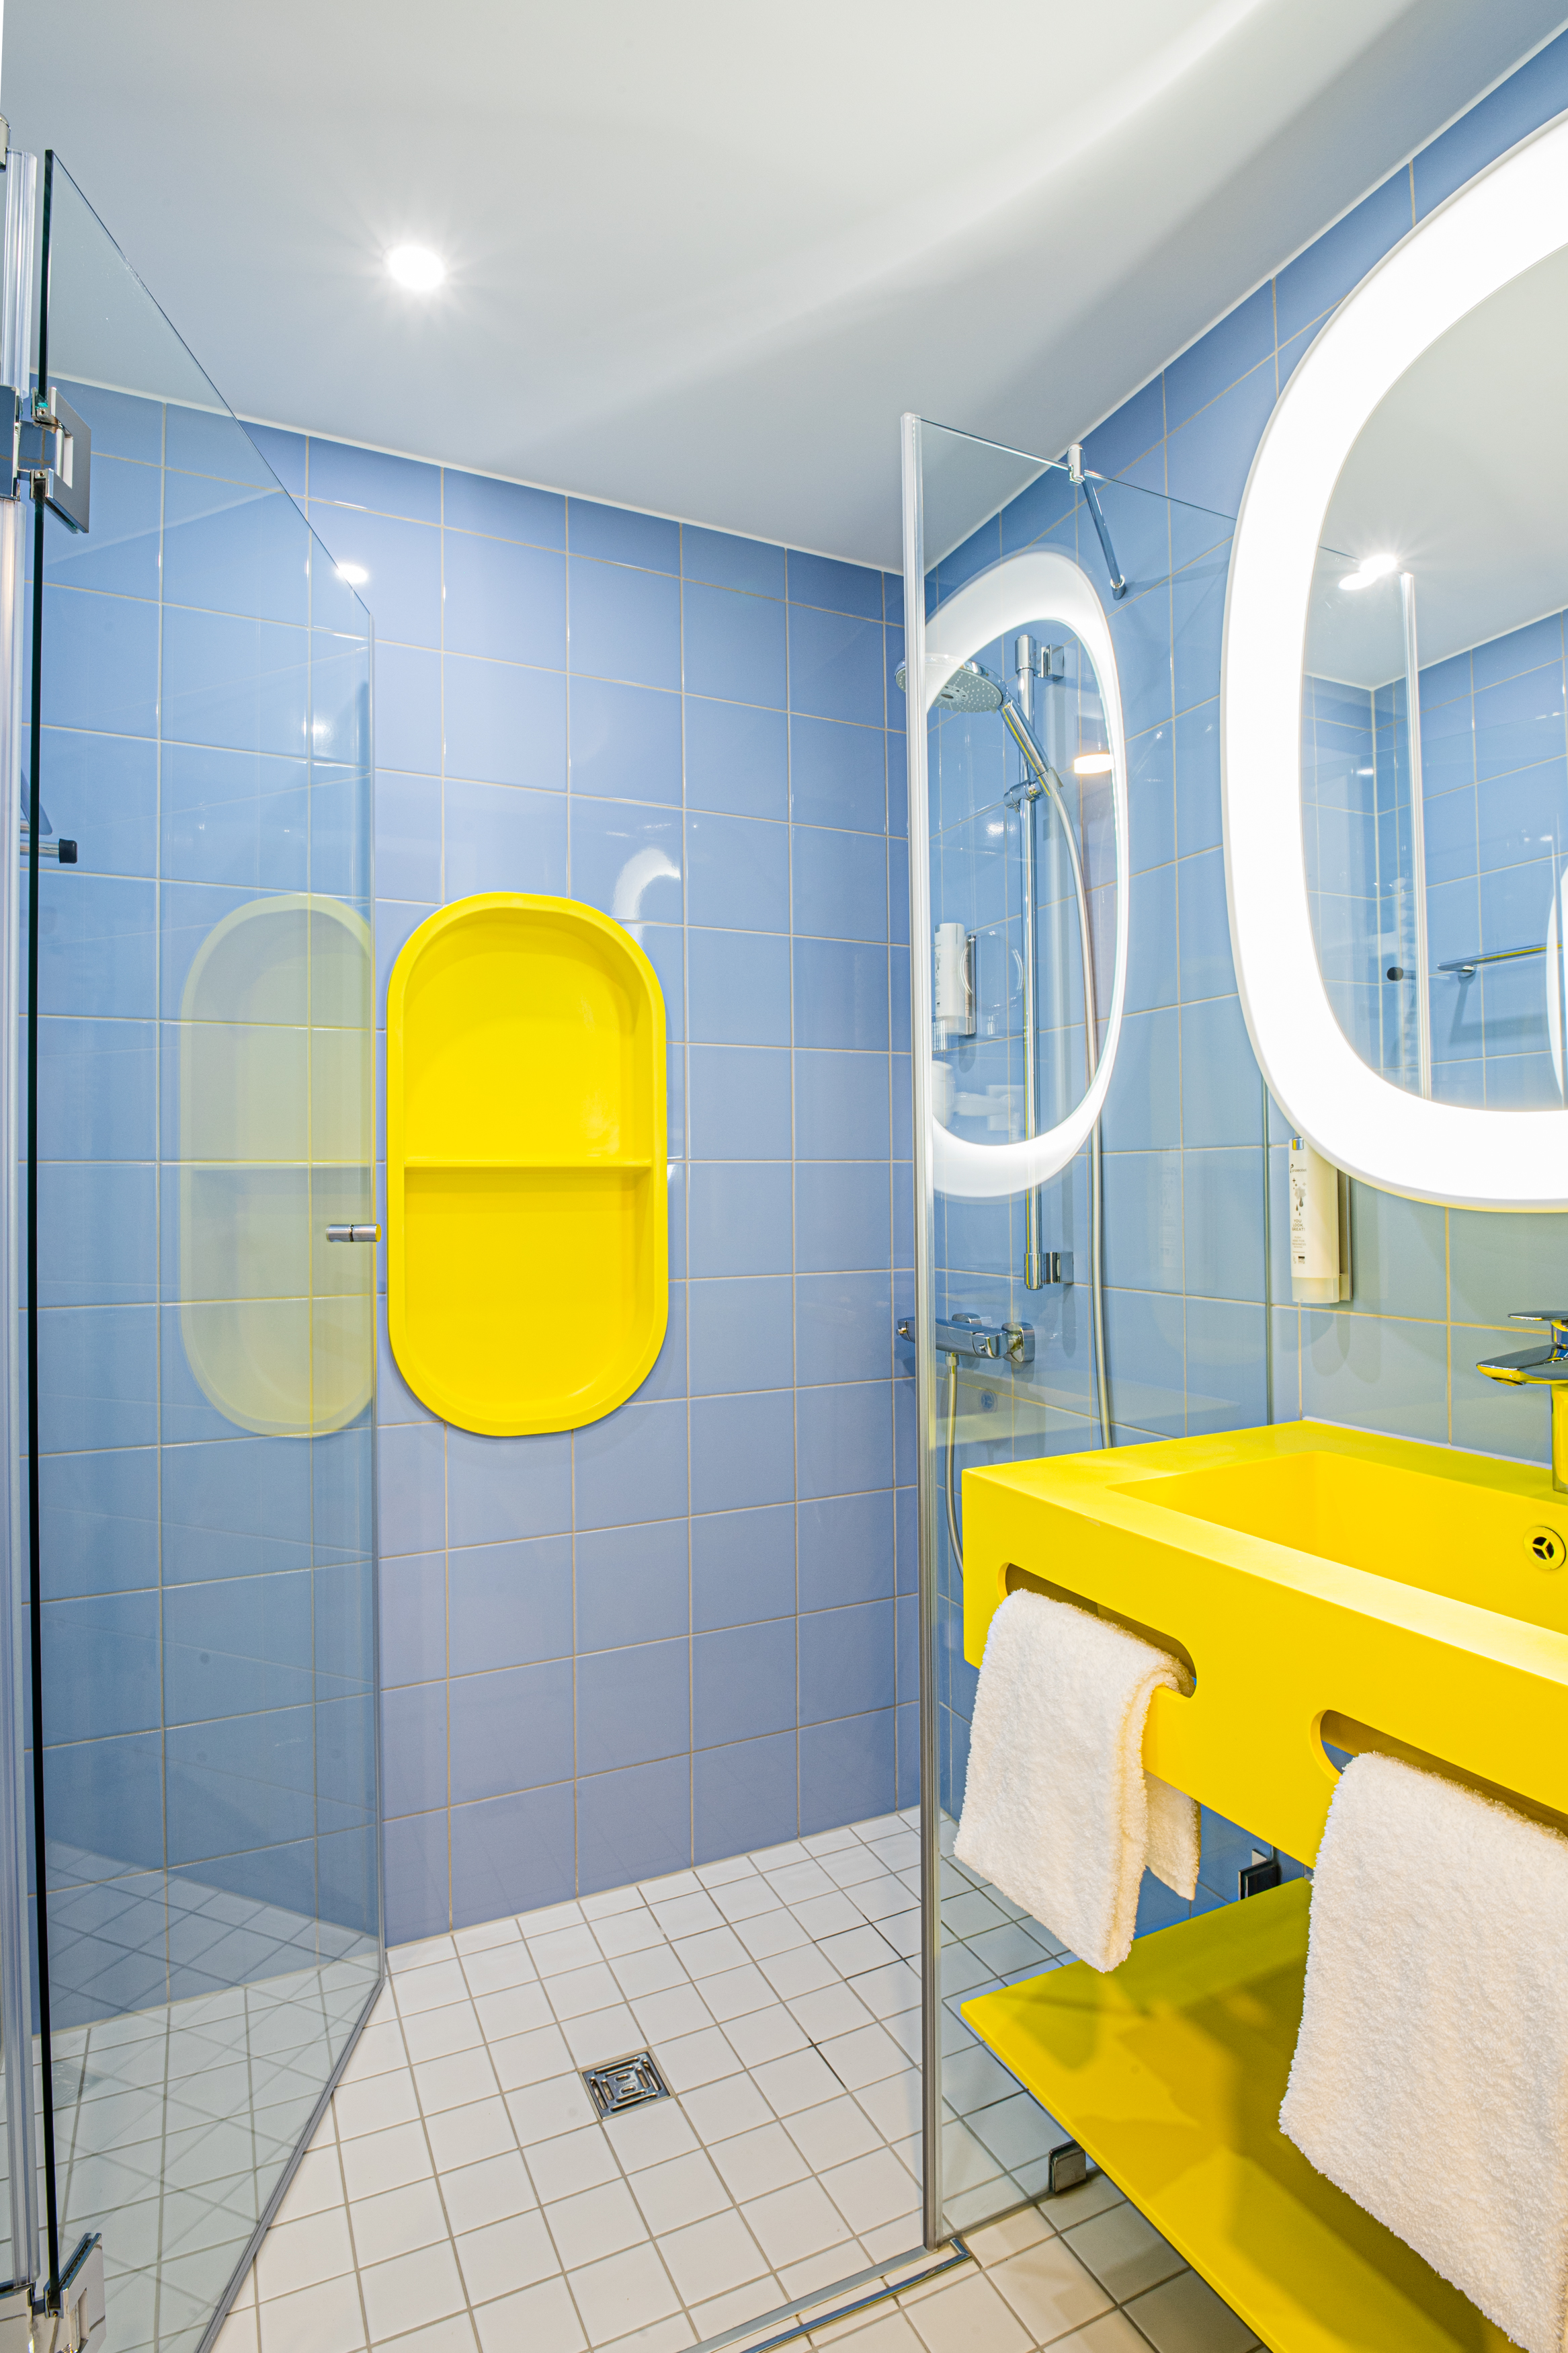 Bathroom with light blue tiles and a yellow sink